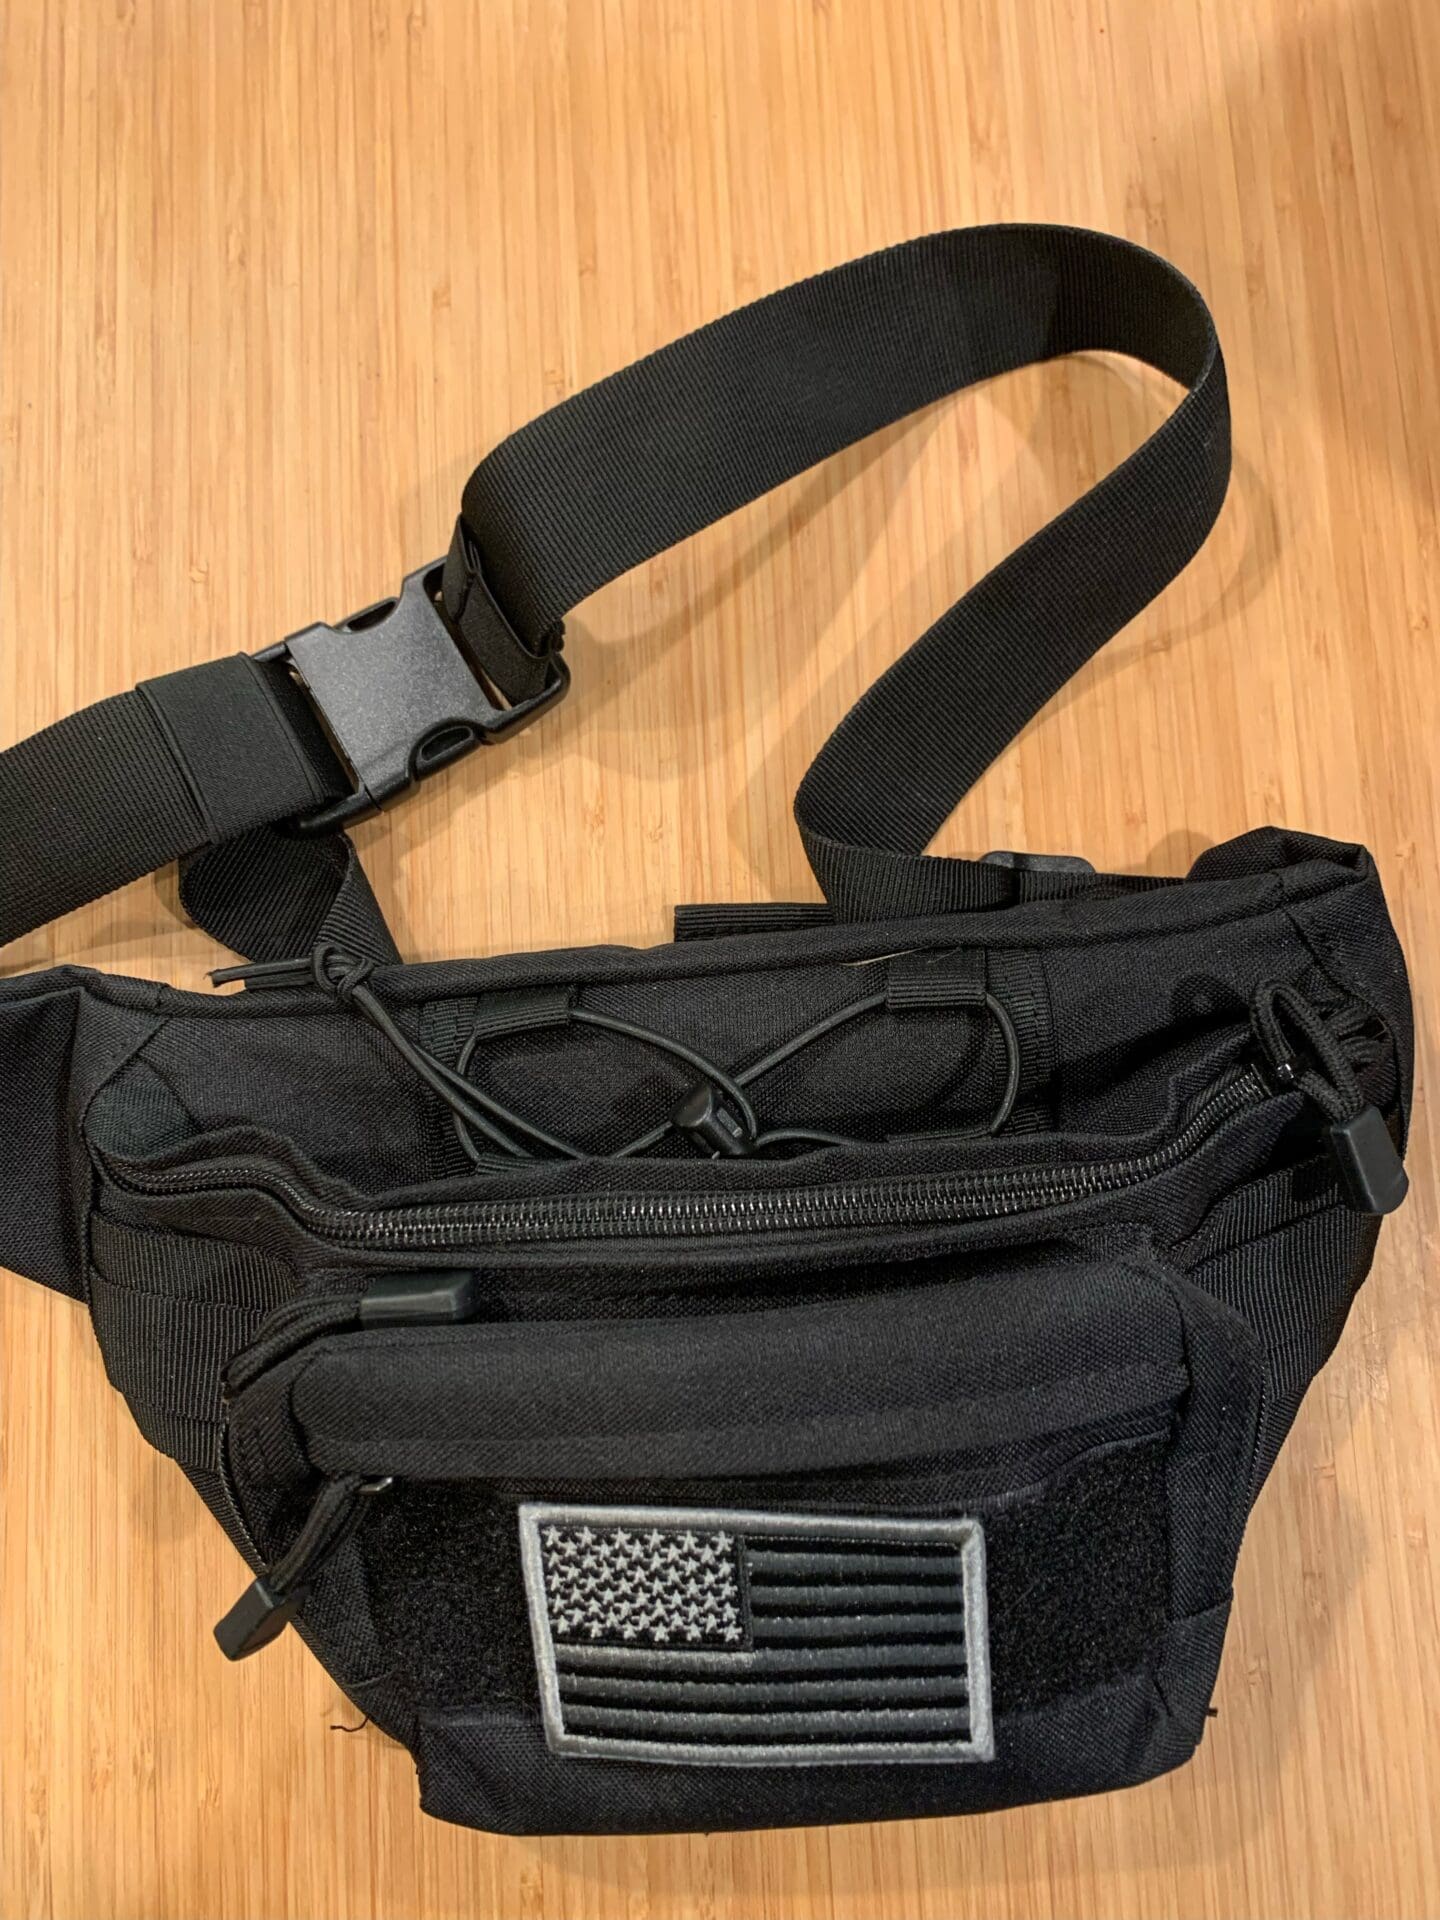 A black bag with an american flag on it.